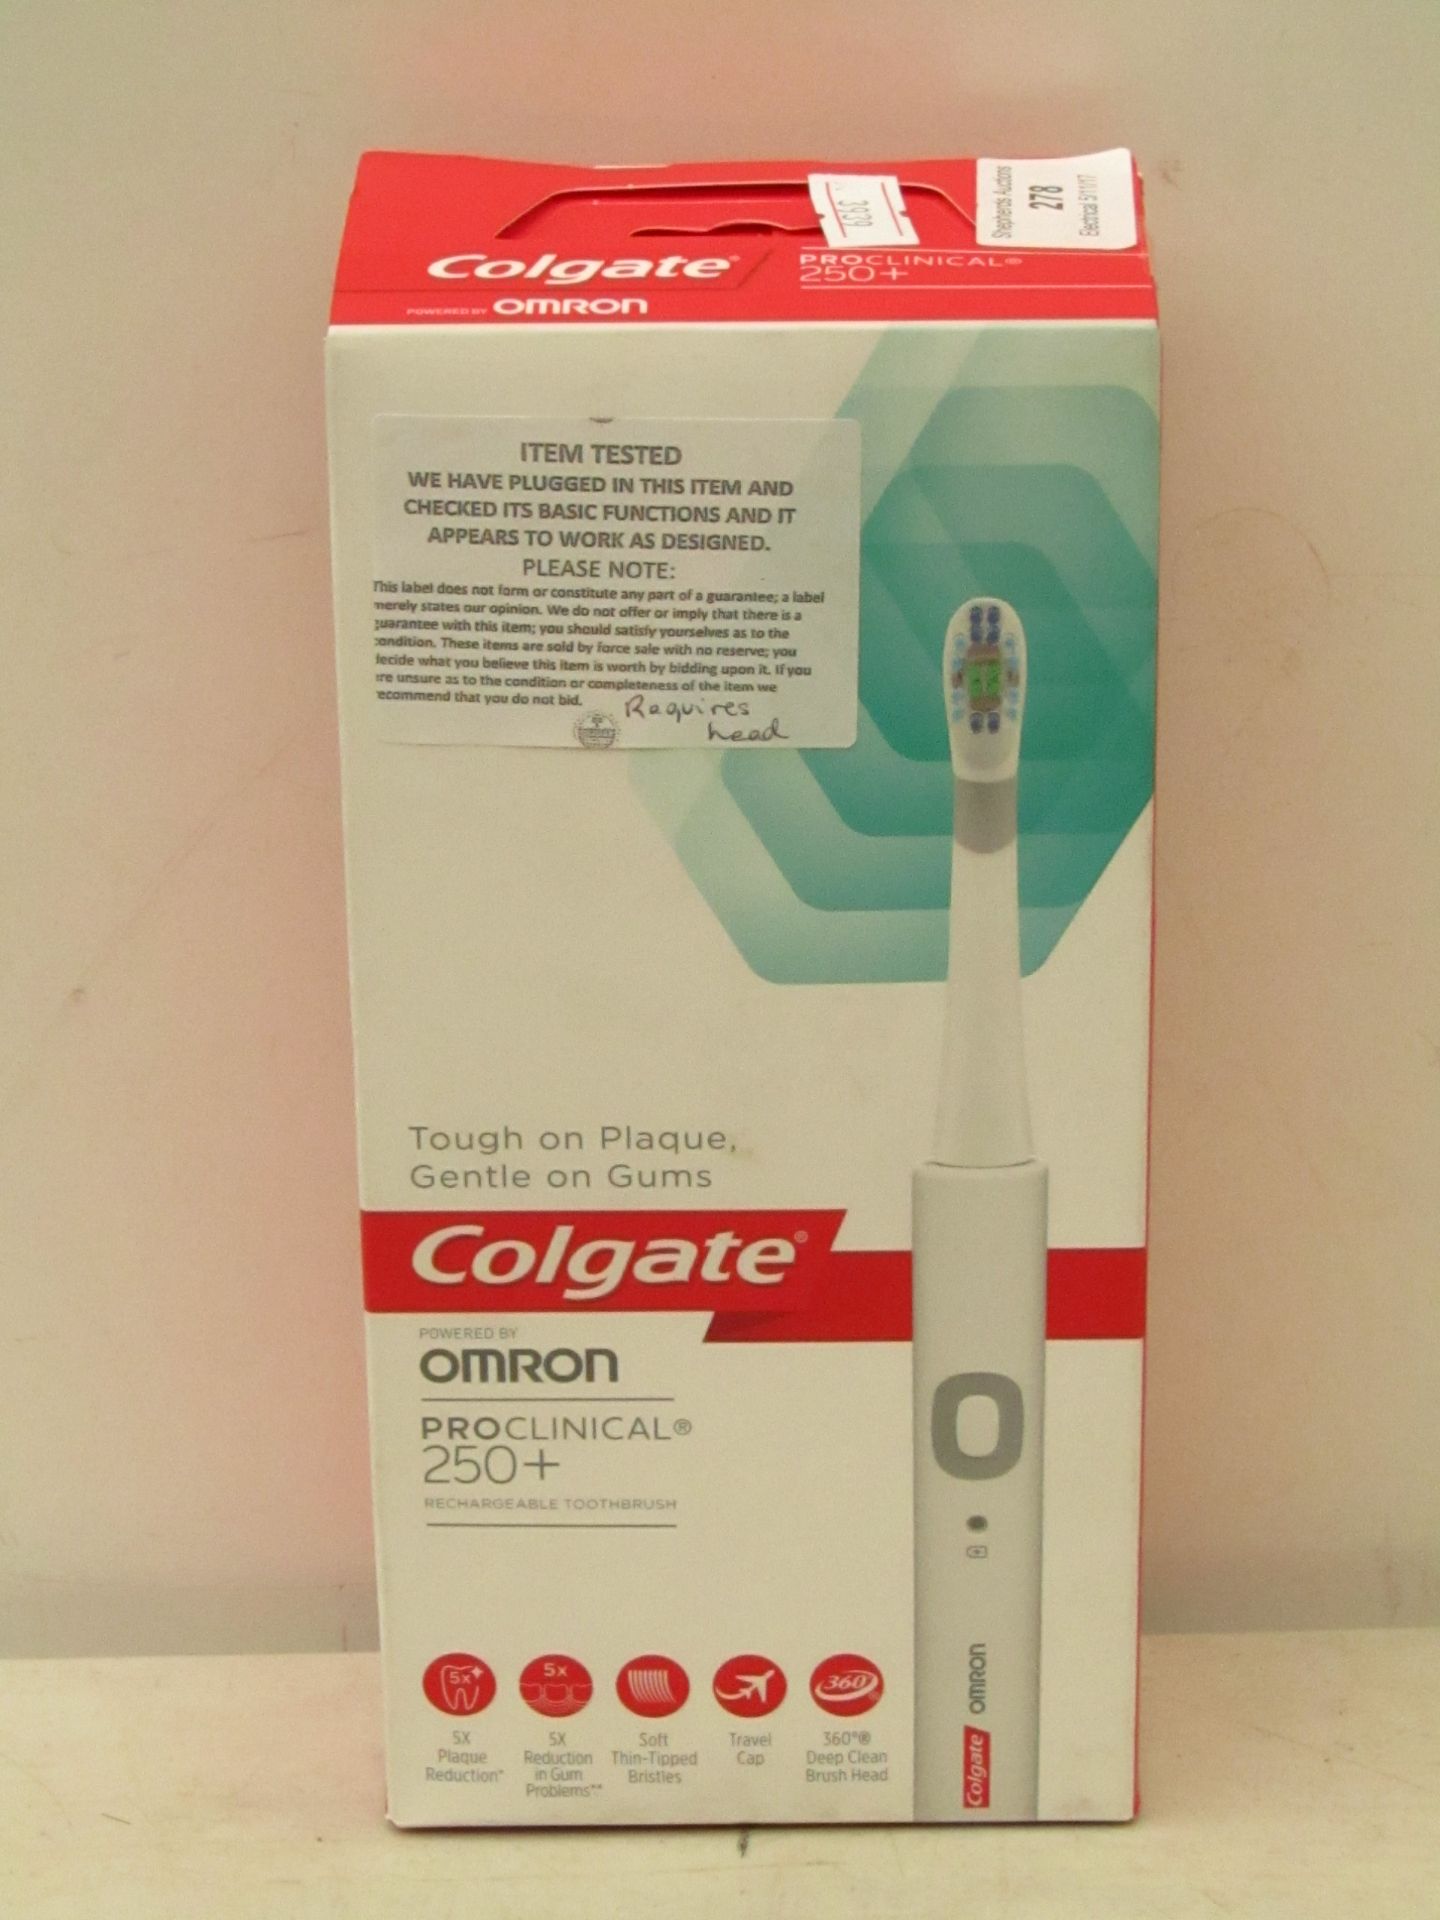 Colgate Omron ProClinical rechargeable toothbrush, tested working but requires head. Boxed.